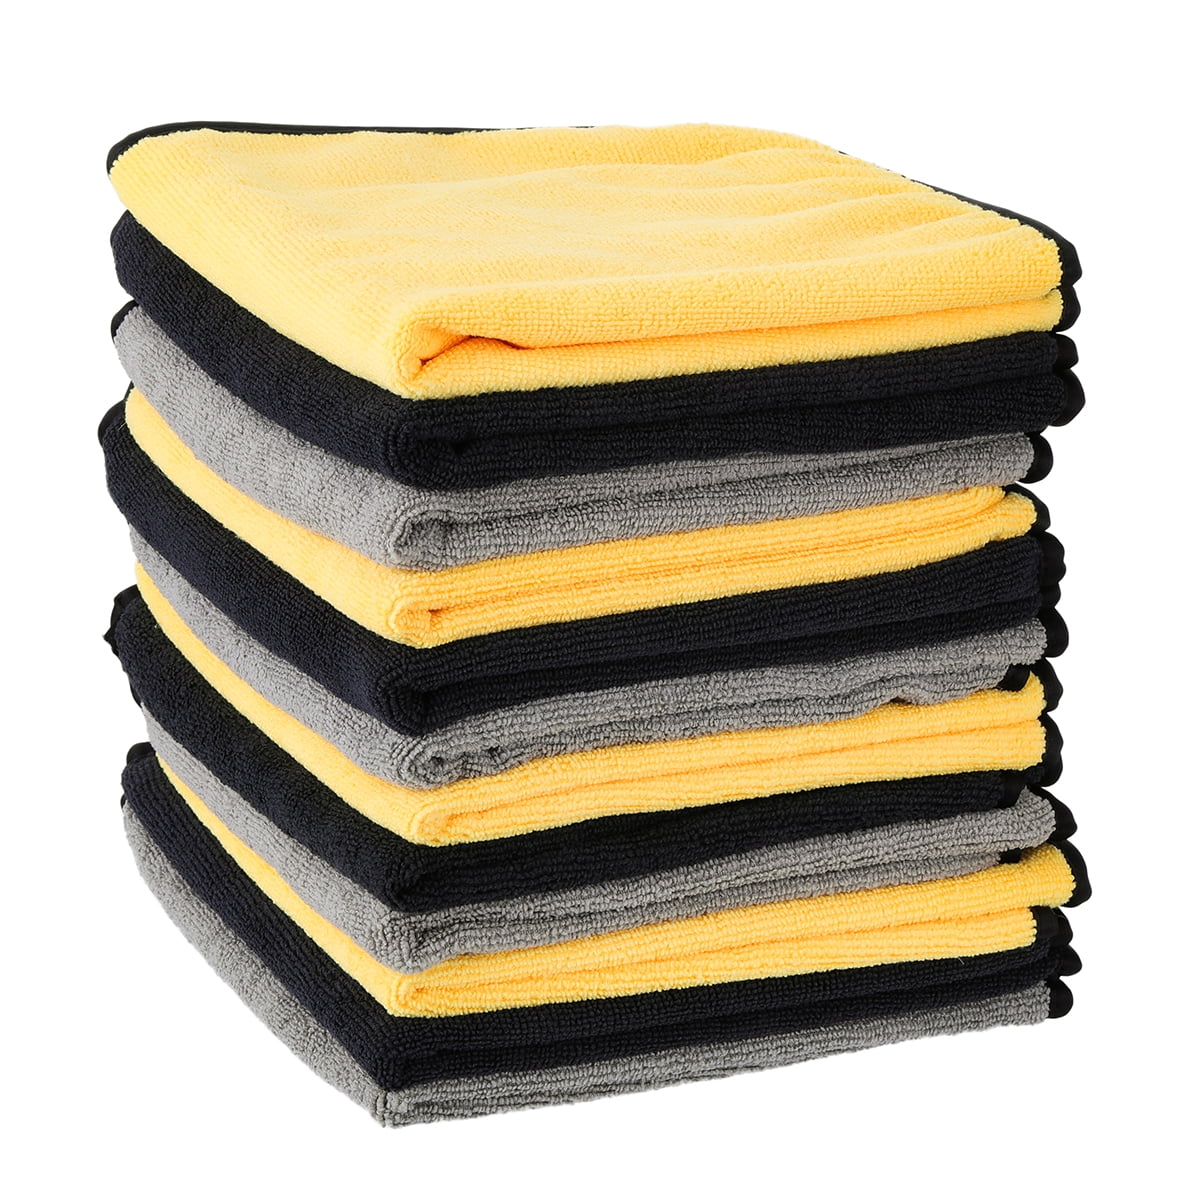 240 Microfiber Yellow 16"x16" Cleaning Detailing Cloths Towels Auto Car Rags 